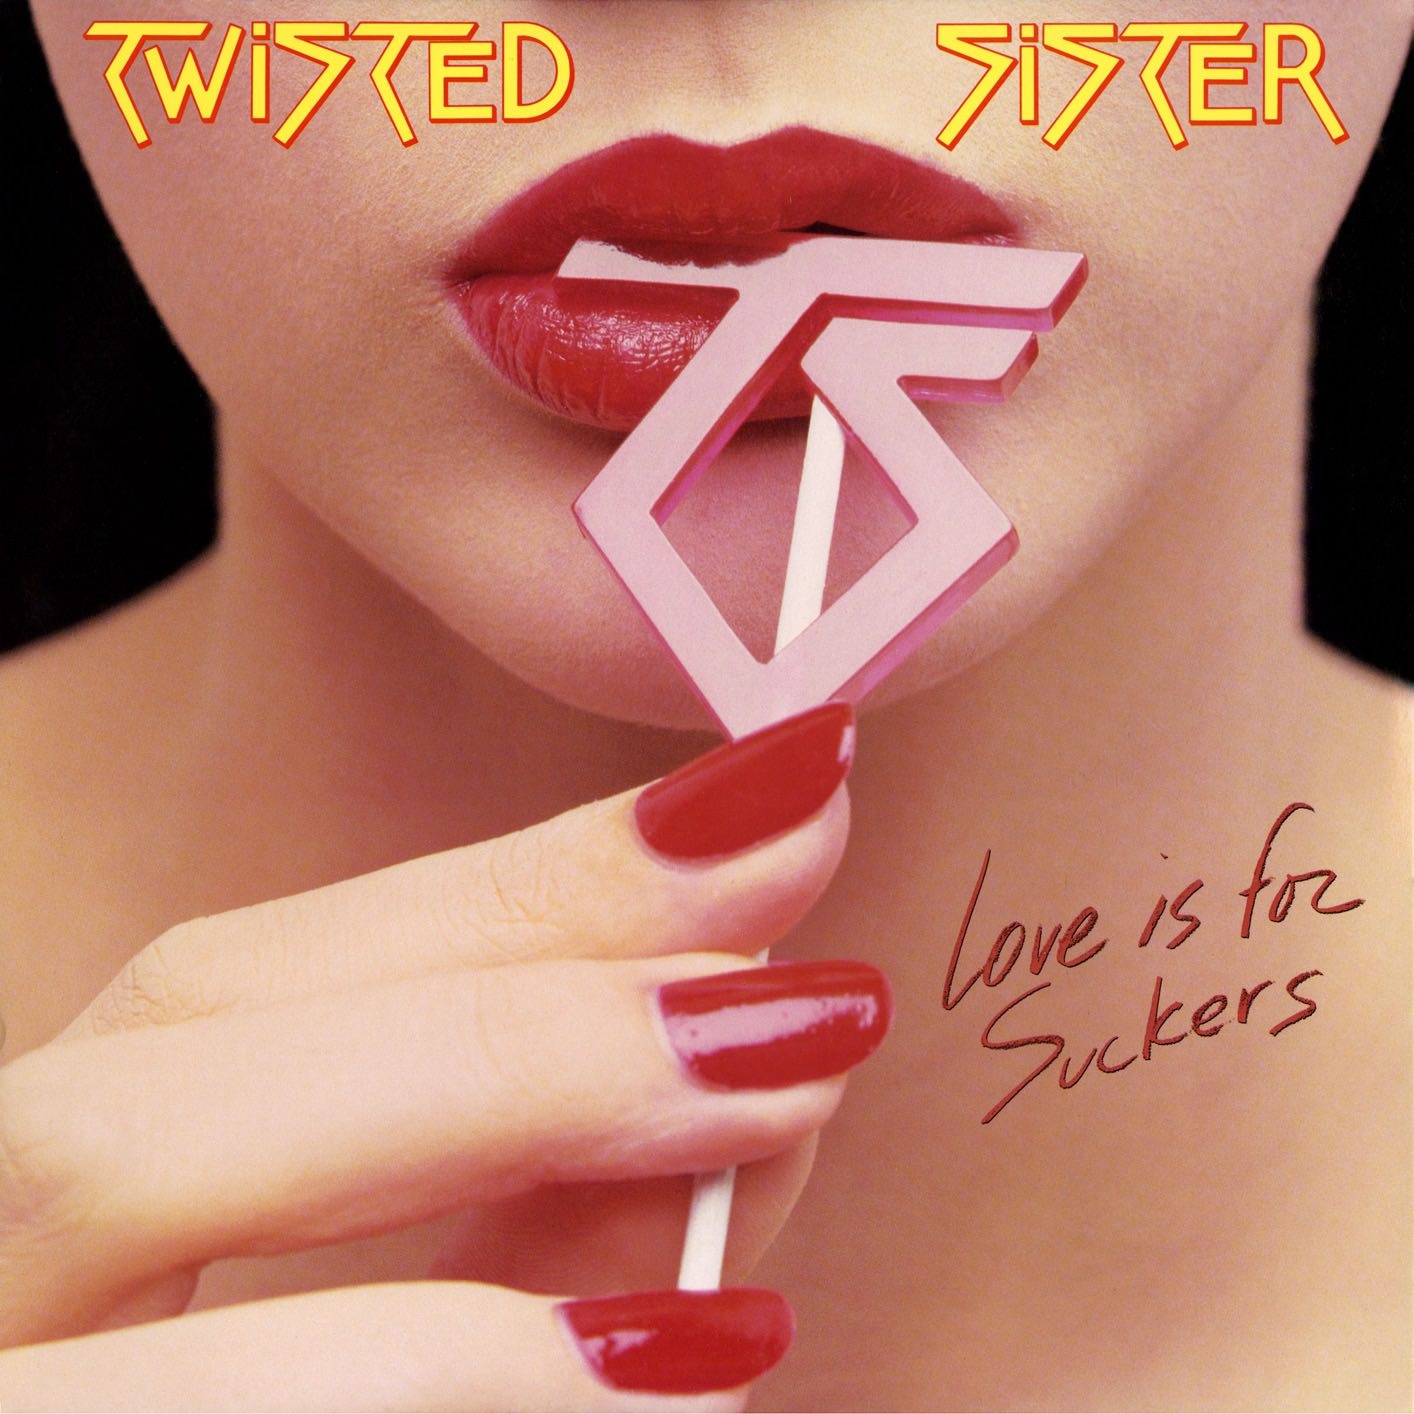 Twisted Sister - Love Is For Suckers (1987/2017) [AcousticSounds FLAC 24bit/192kHz]